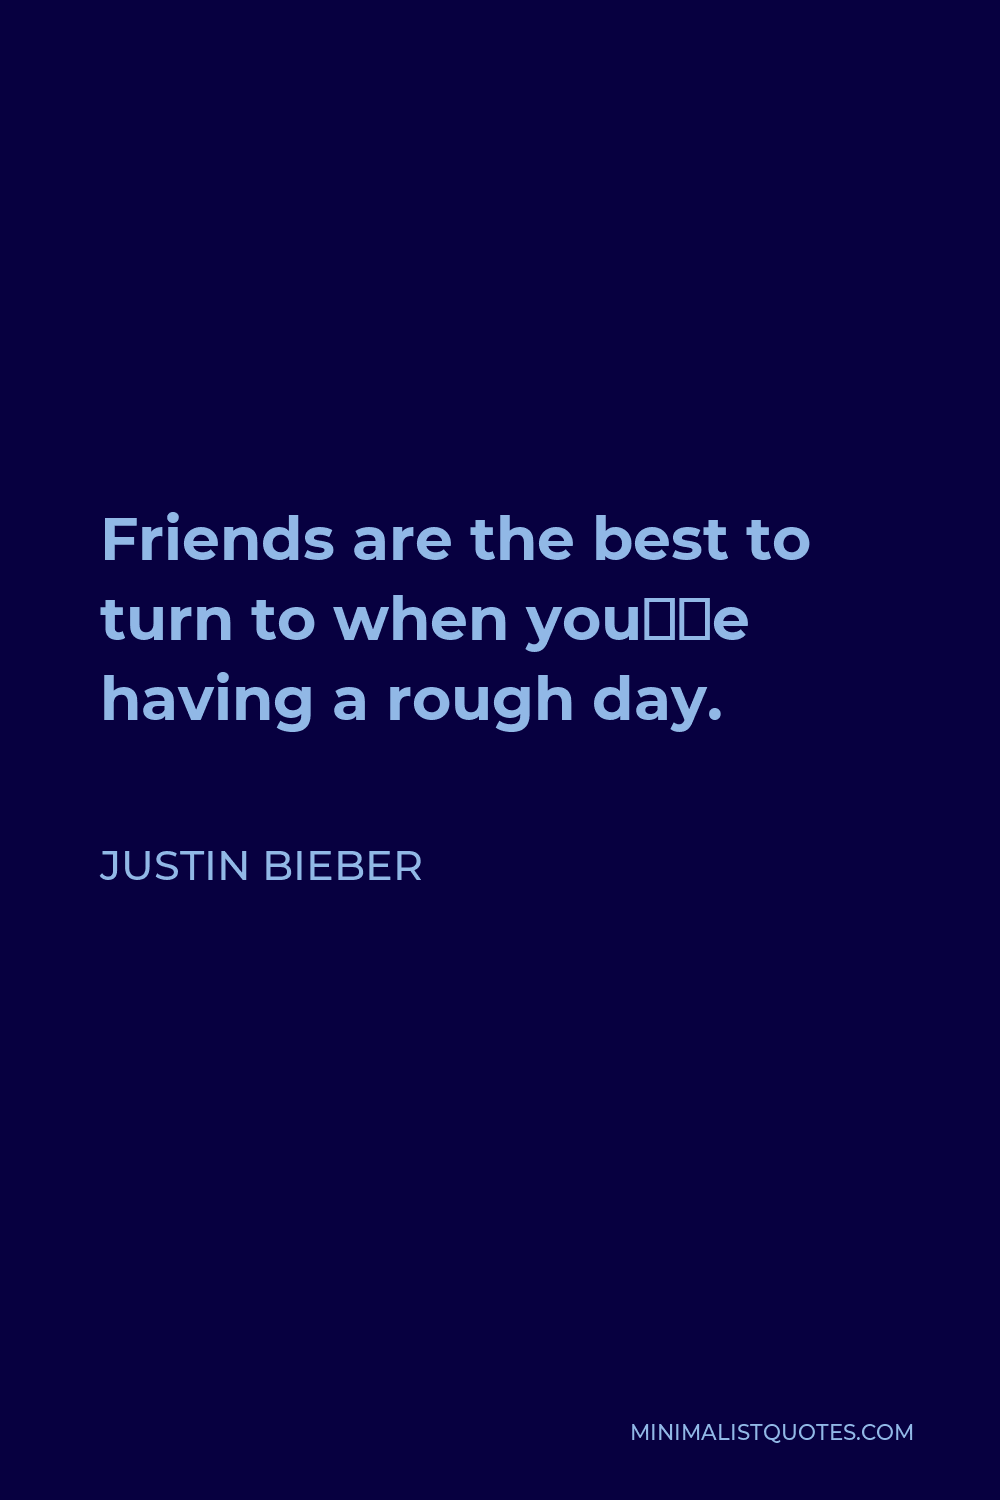 Justin Bieber Quote - Friends are the best to turn to when you’re having a rough day.